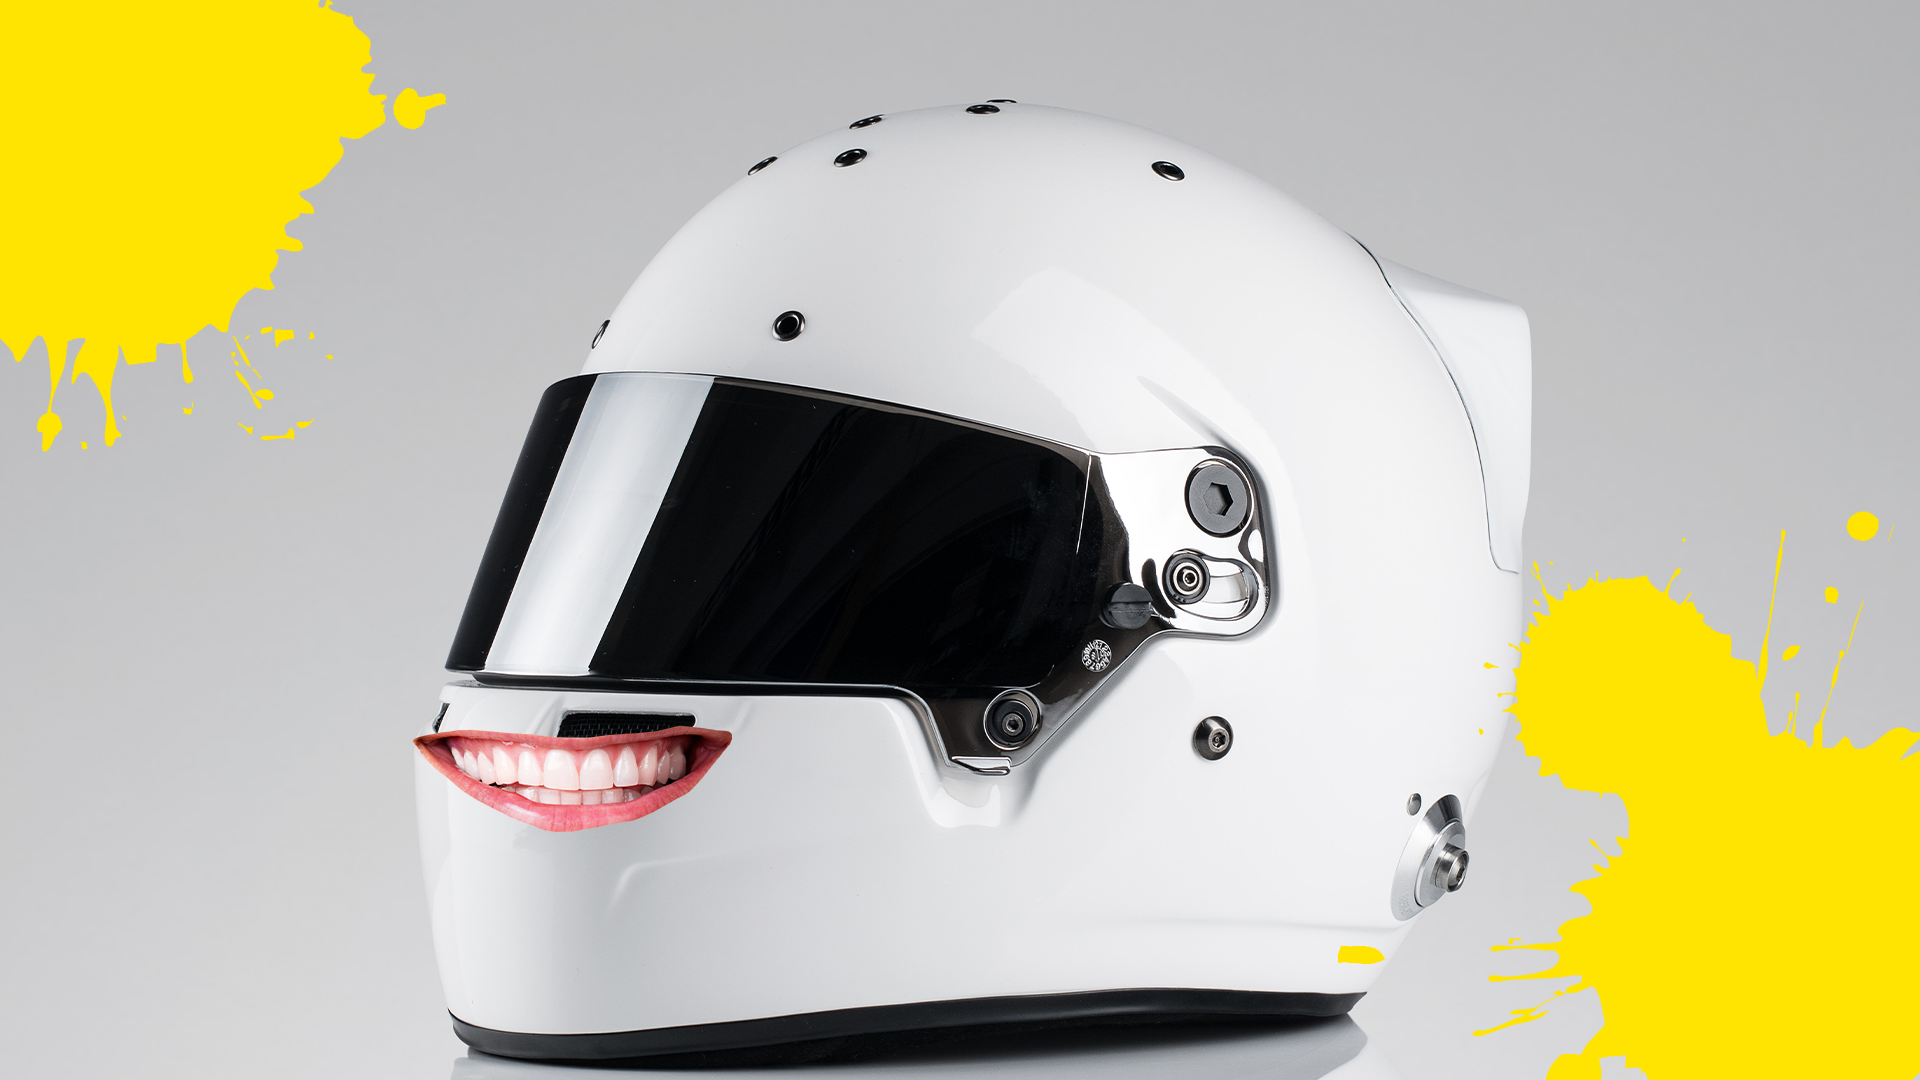 Racing driver's helmet with splats and mouth